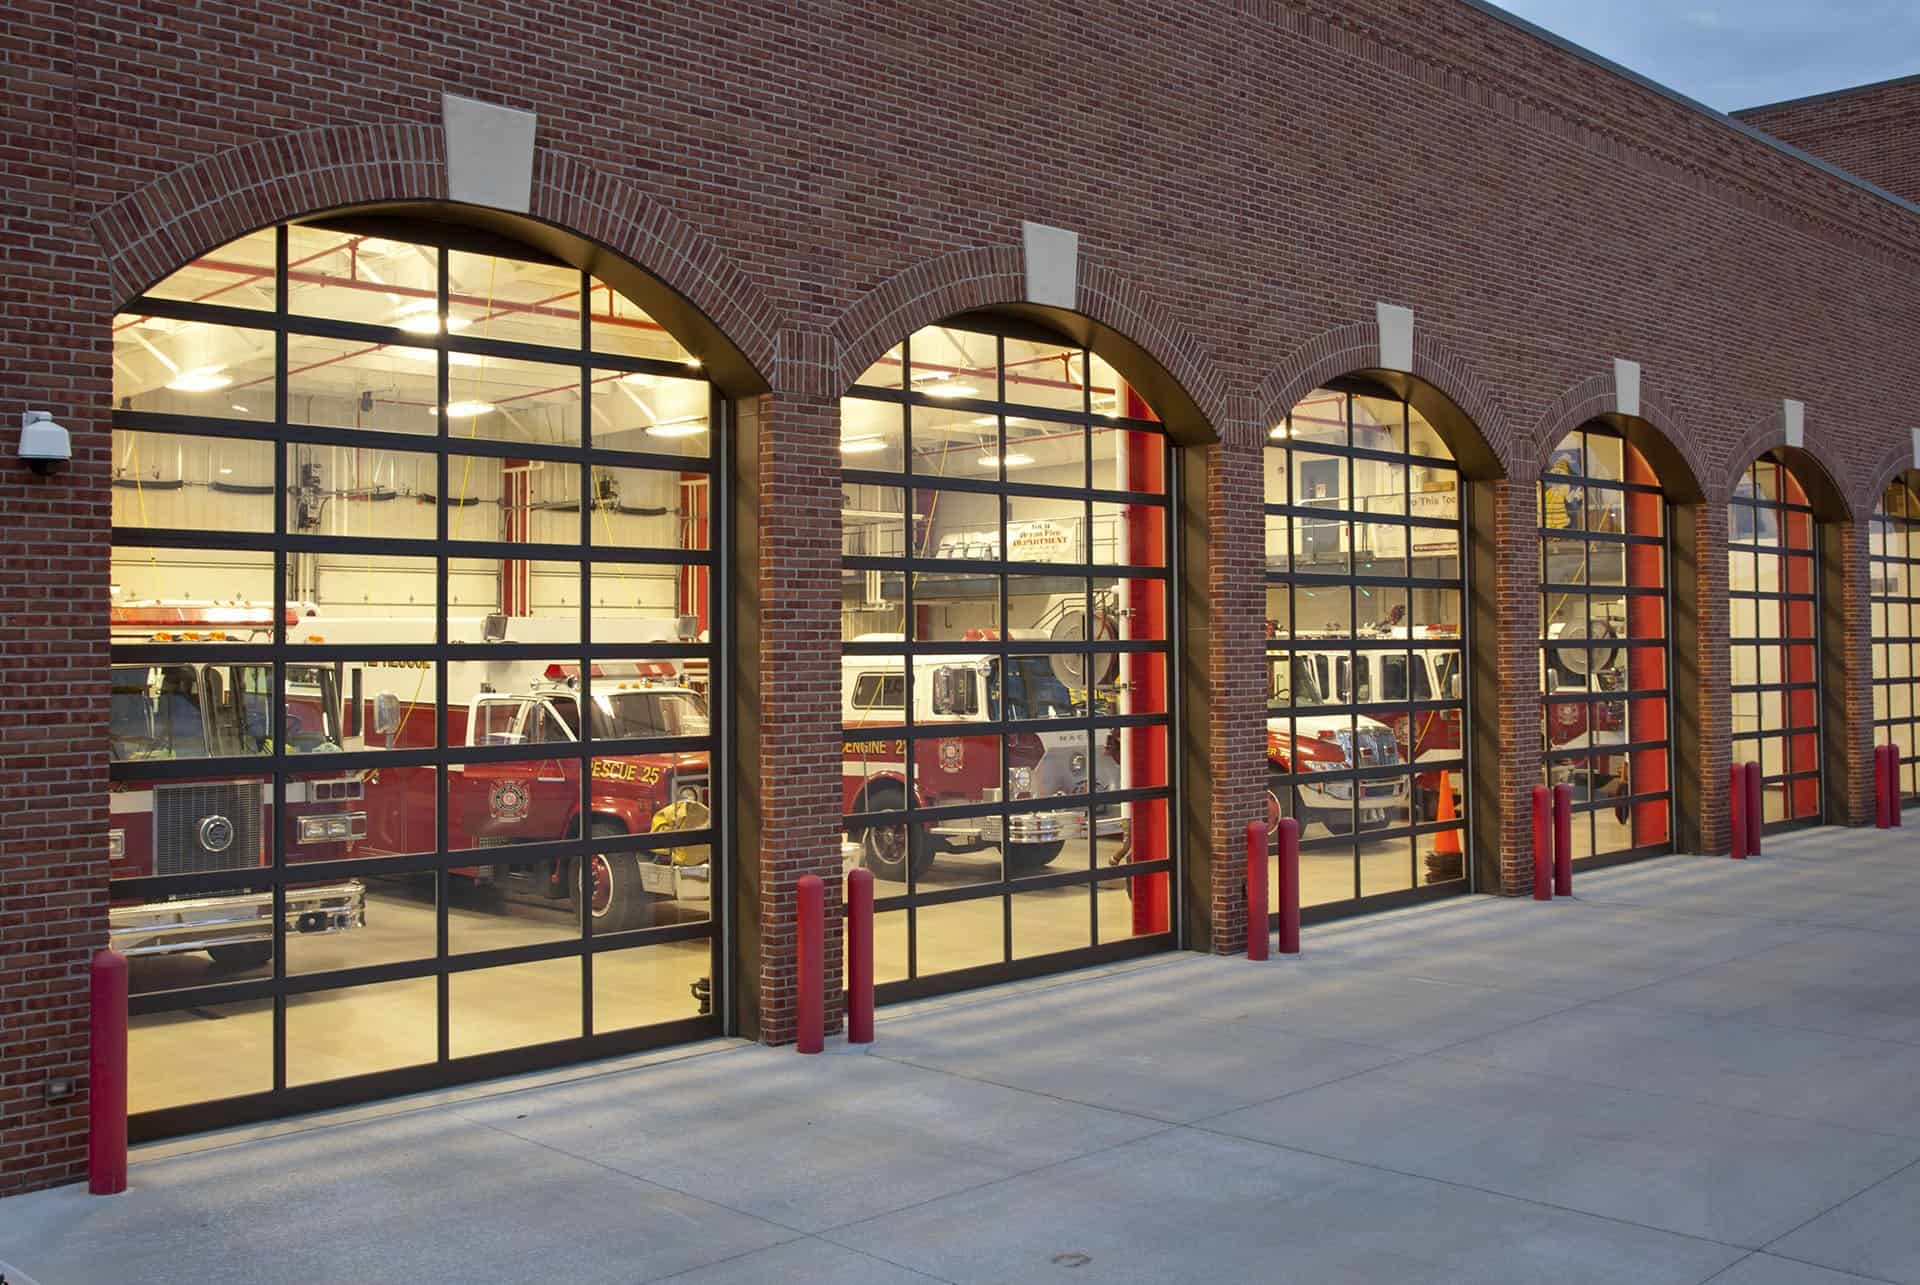 a fire truck is parked in front of a brick building.